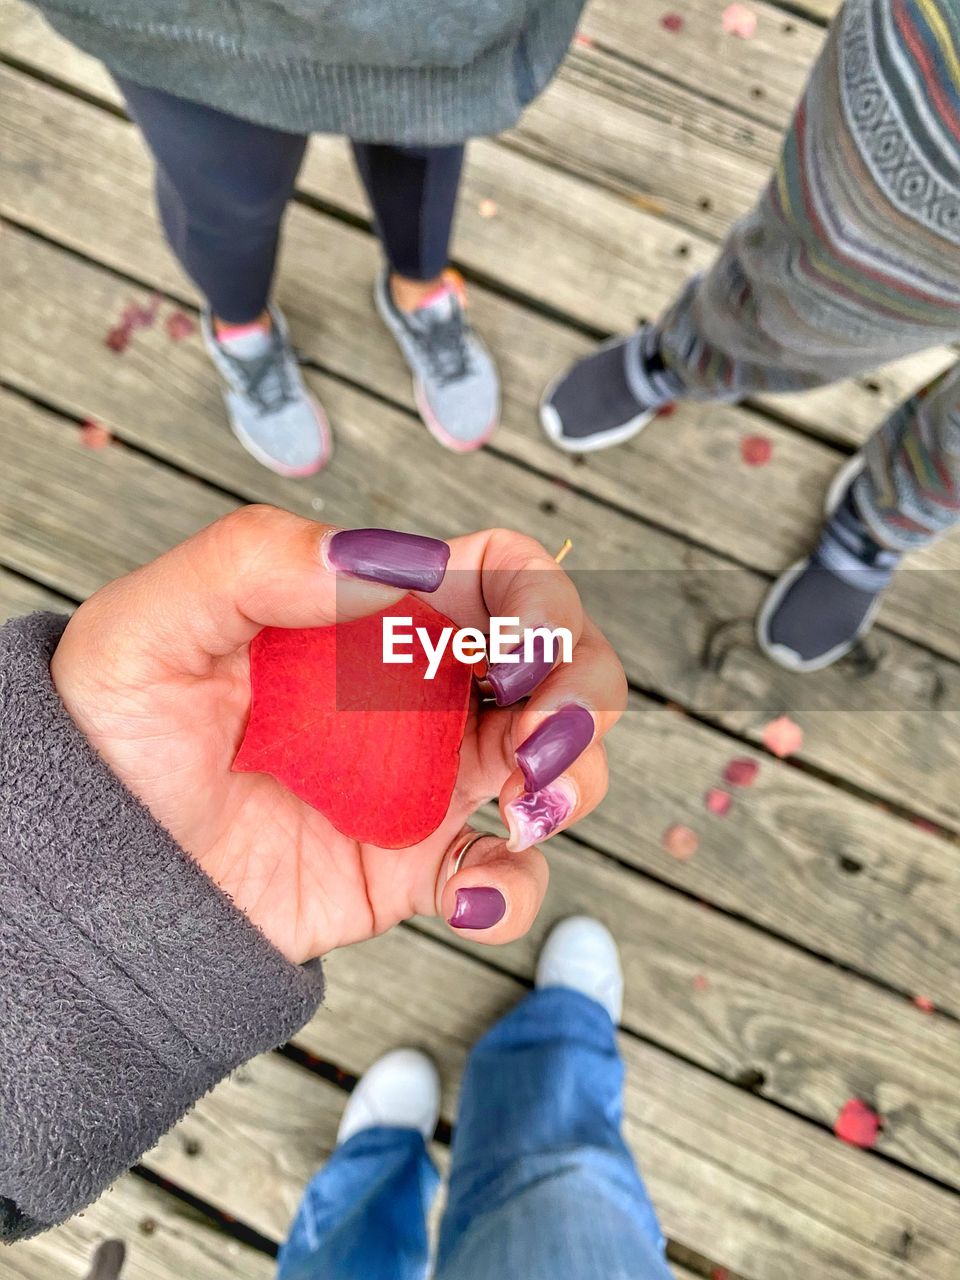 two people, blue, footwear, adult, wood, men, women, low section, togetherness, high angle view, red, hand, human leg, casual clothing, holding, day, bonding, spring, clothing, leisure activity, lifestyles, shoe, jeans, outdoors, female, positive emotion, love, limb, friendship, hardwood floor, emotion